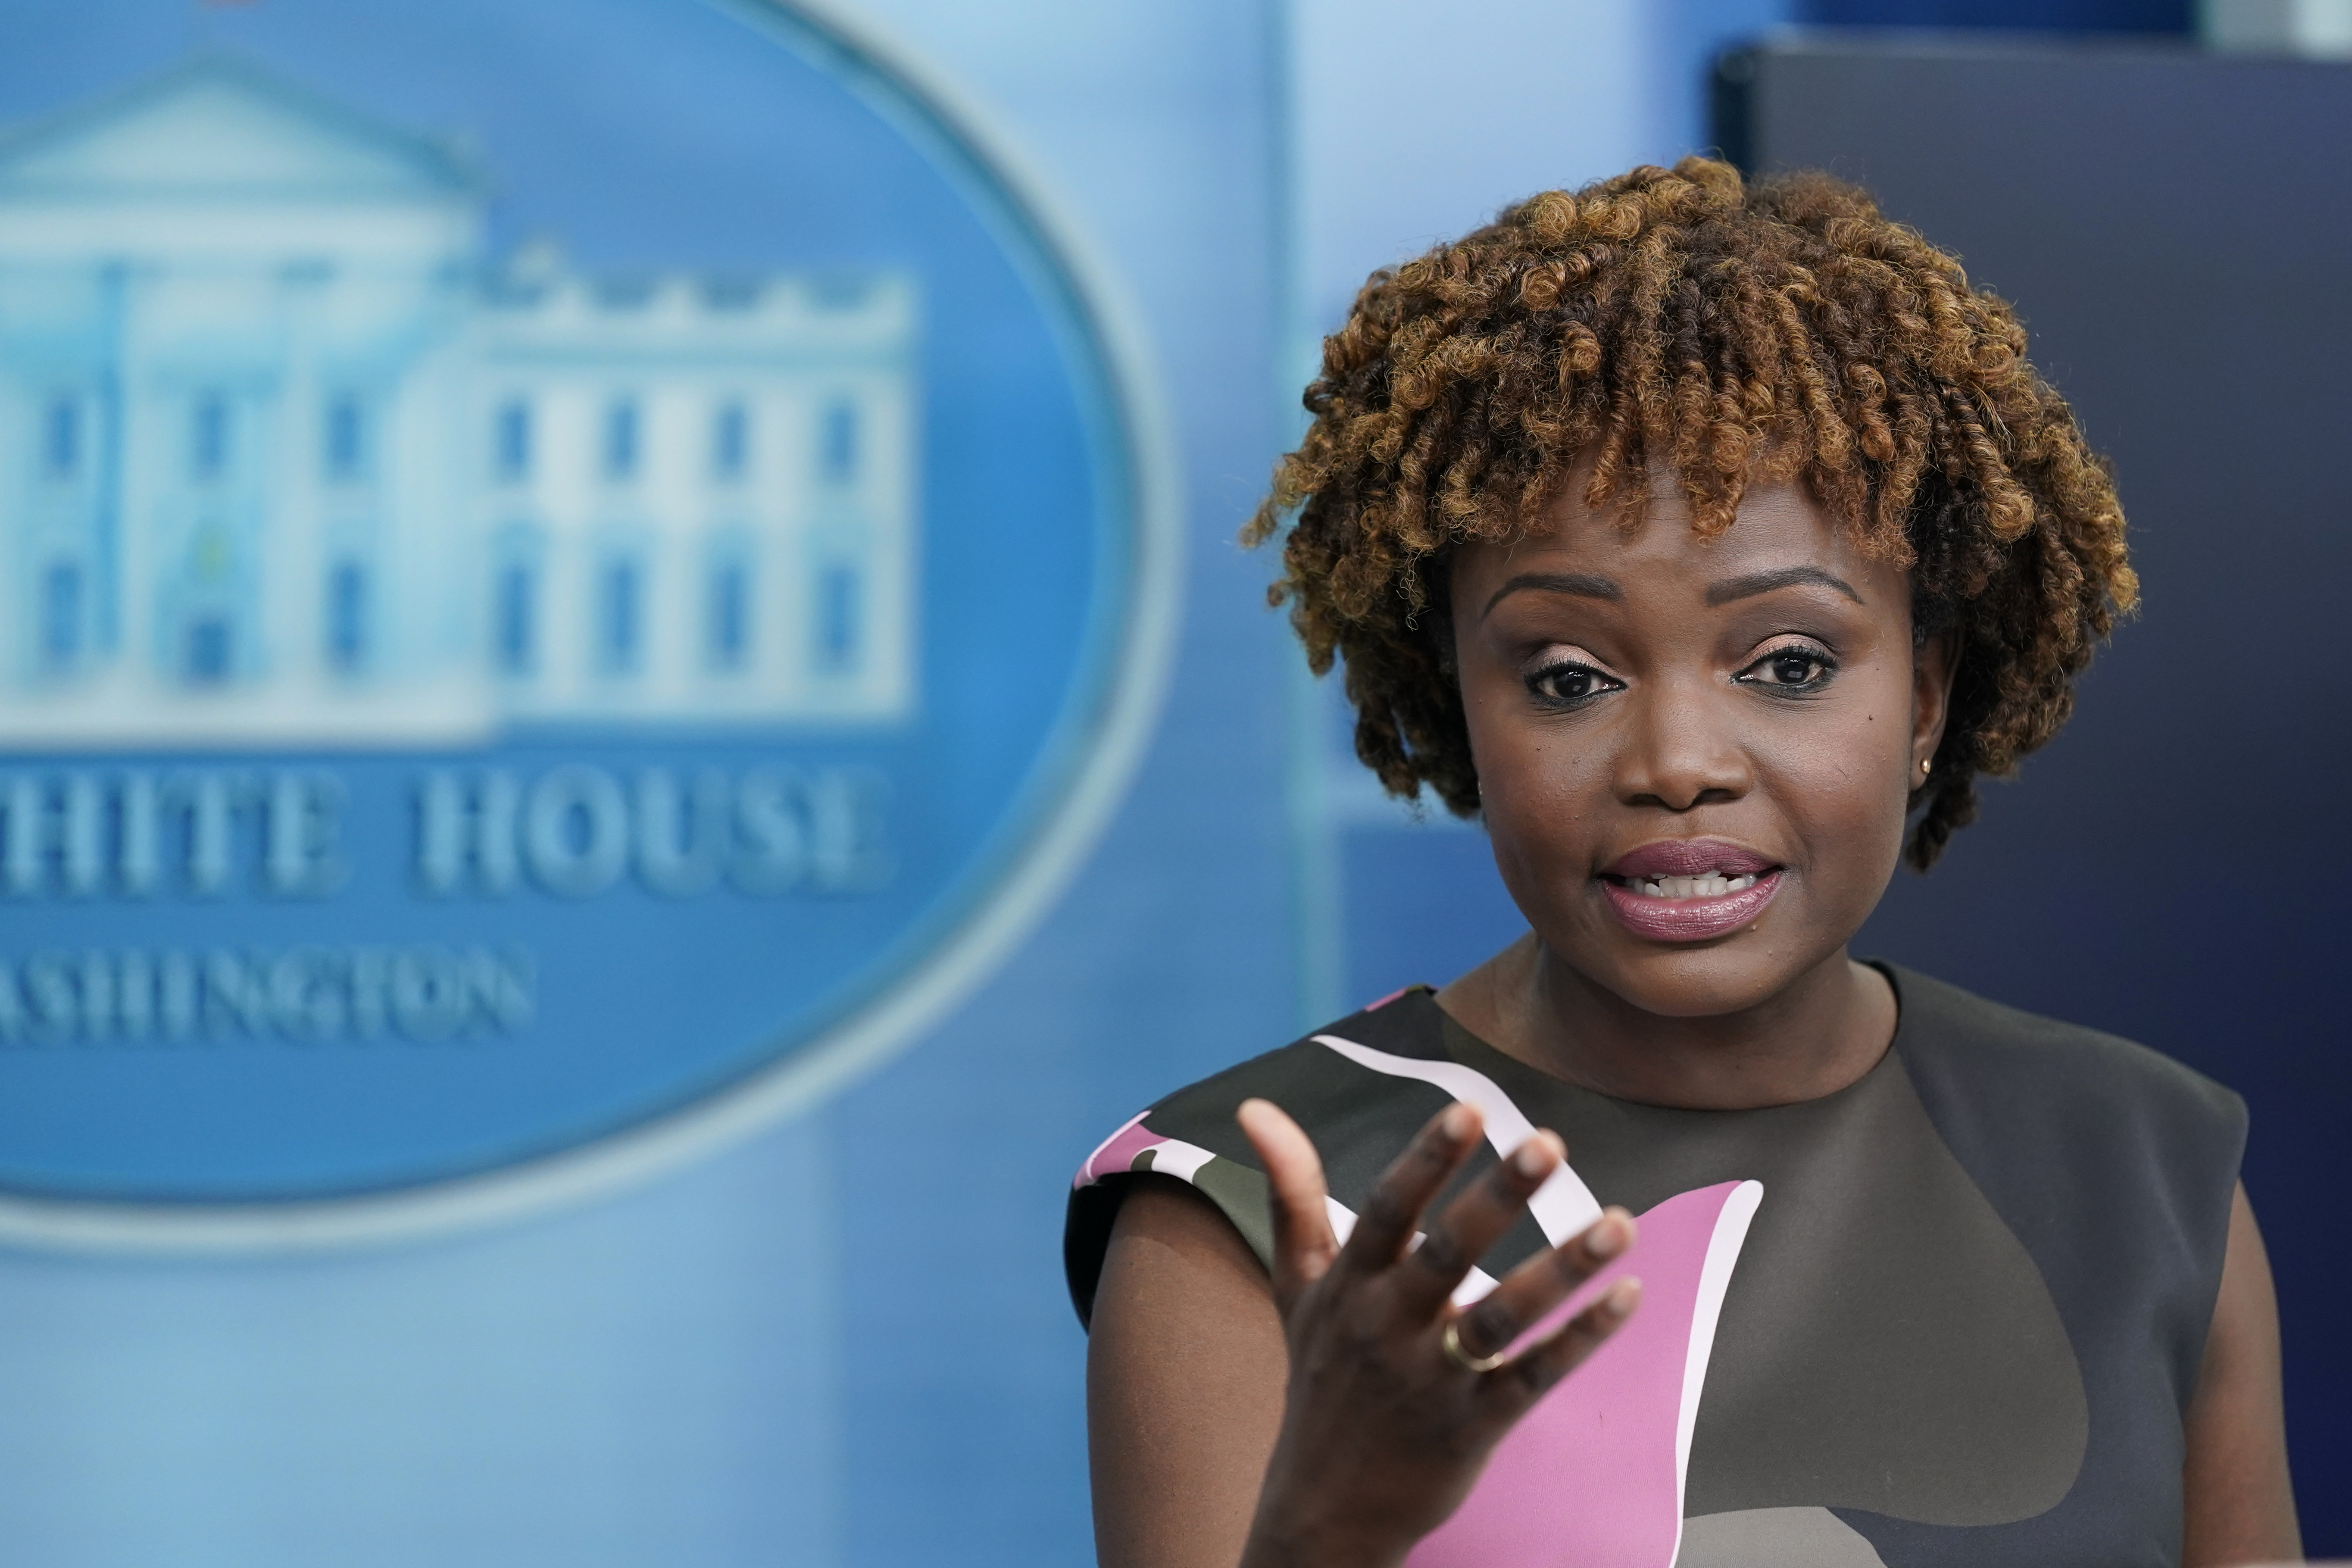 White House press secretary Karine Jean-Pierre speaks during the daily briefing at the White House in Washington, Tuesday, Aug. 9, 2022. (AP Photo/Susan Walsh)